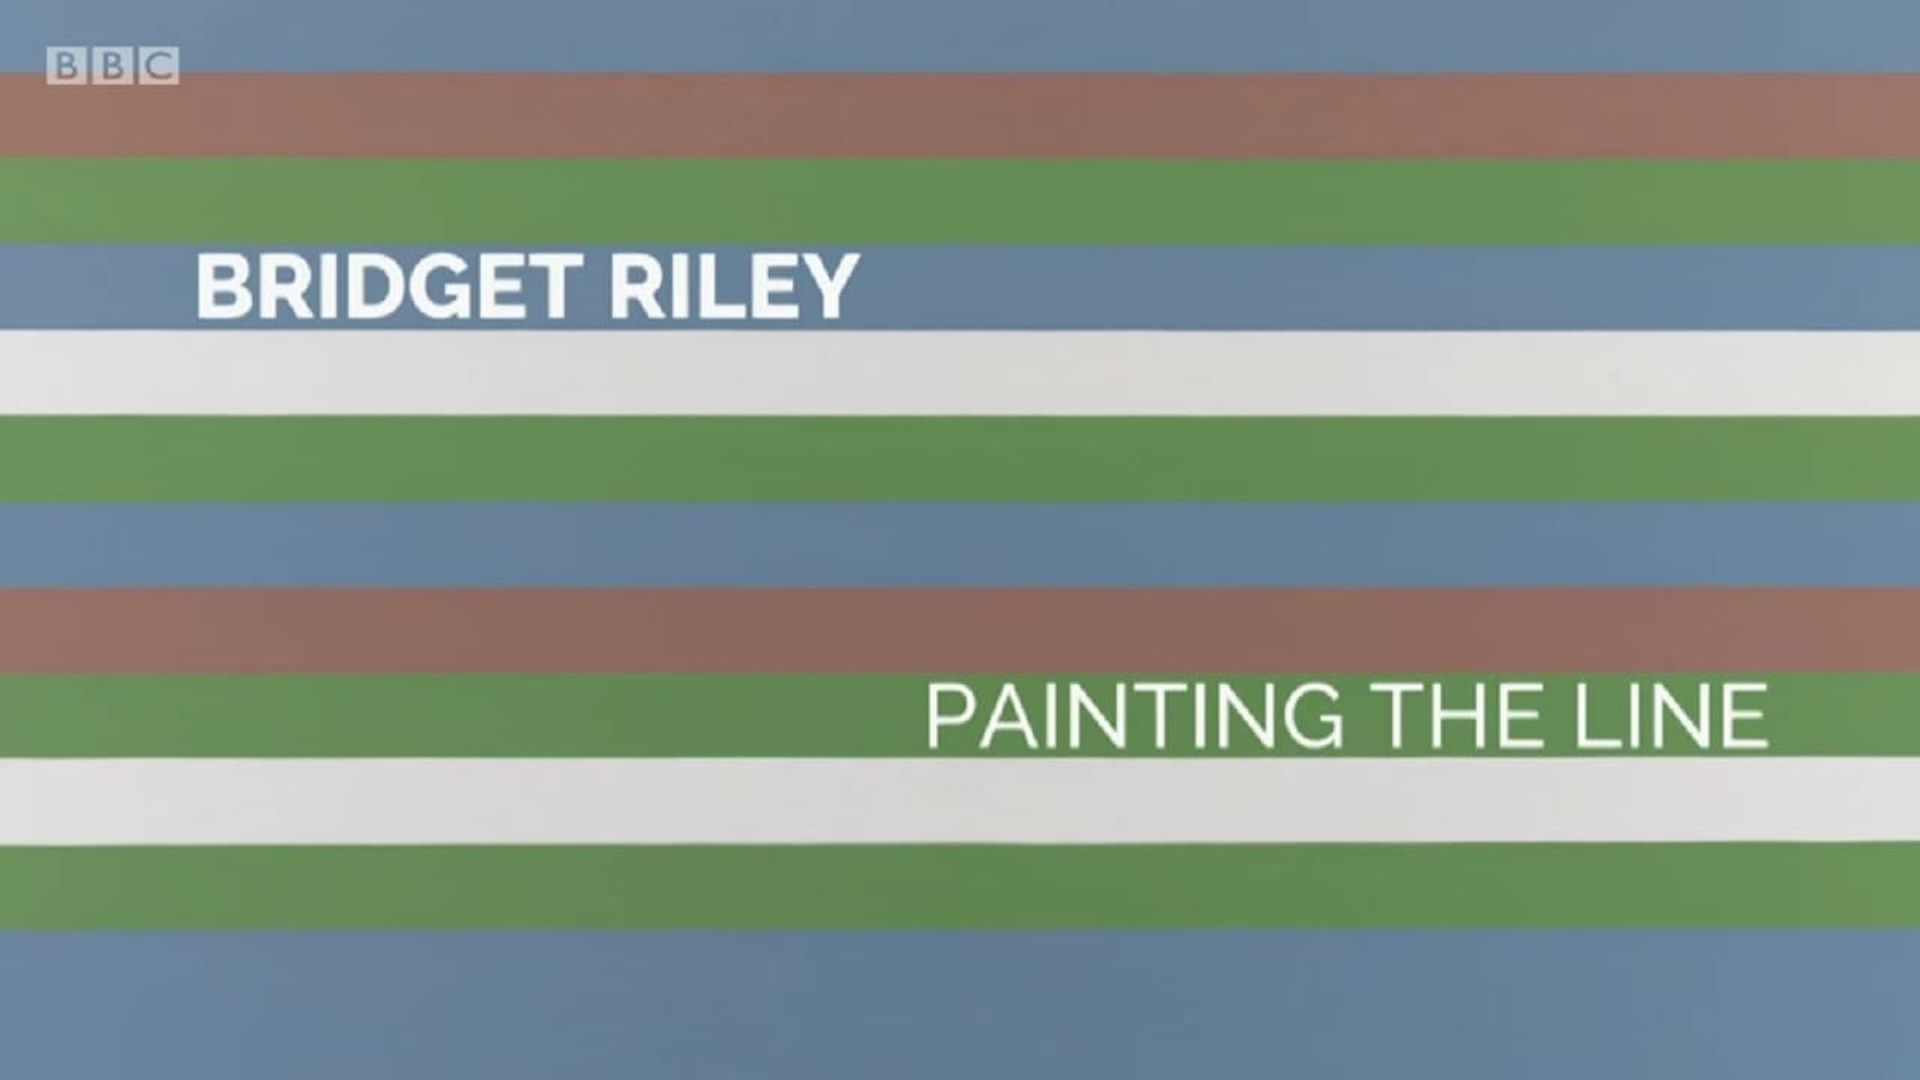 Bridget Riley: Painting the Line background